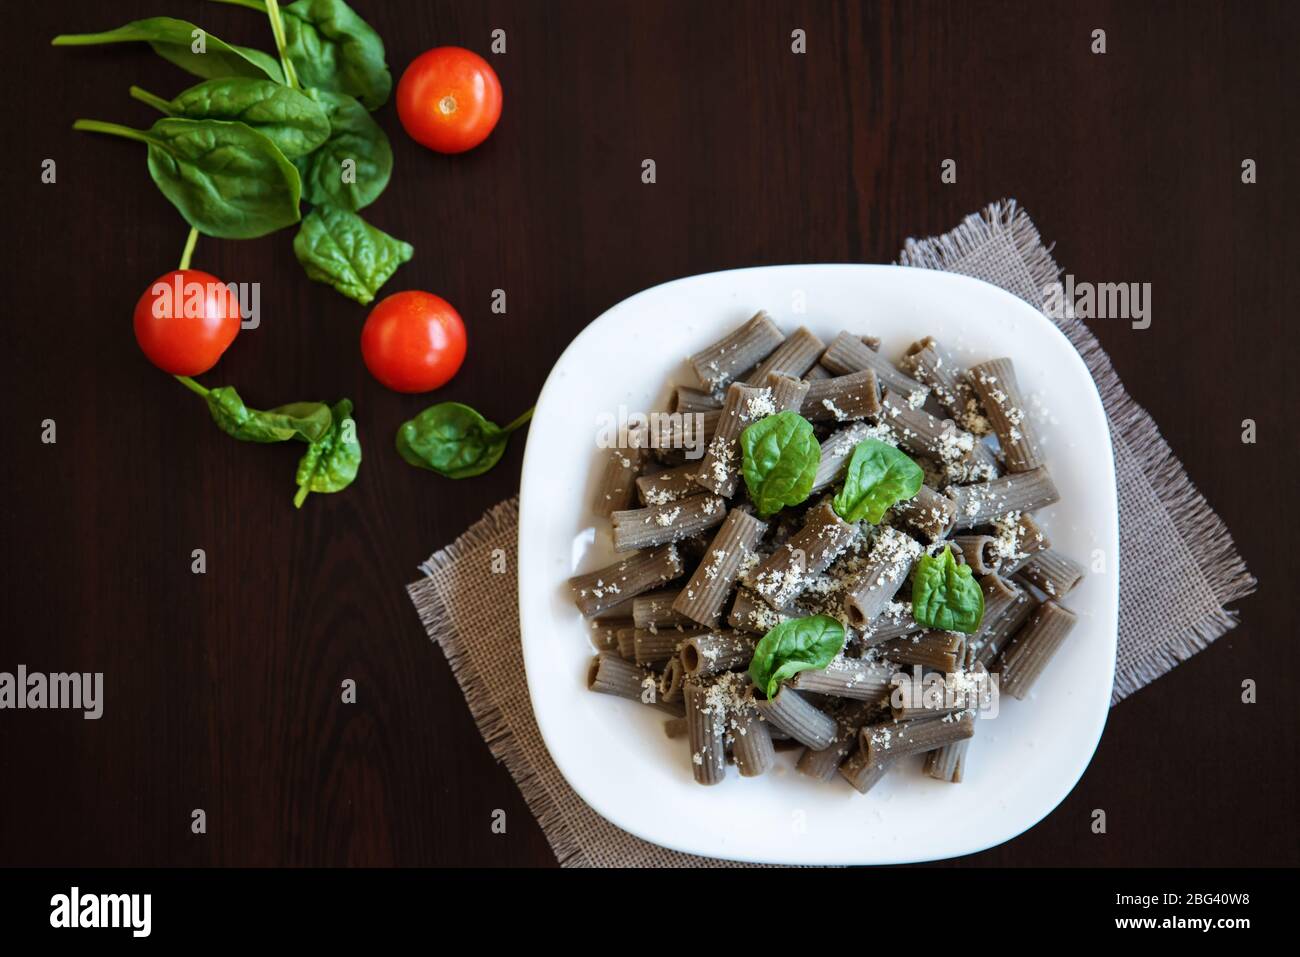 Lentil rigatoni pasta with spinach, tomato and parmesan Stock Photo